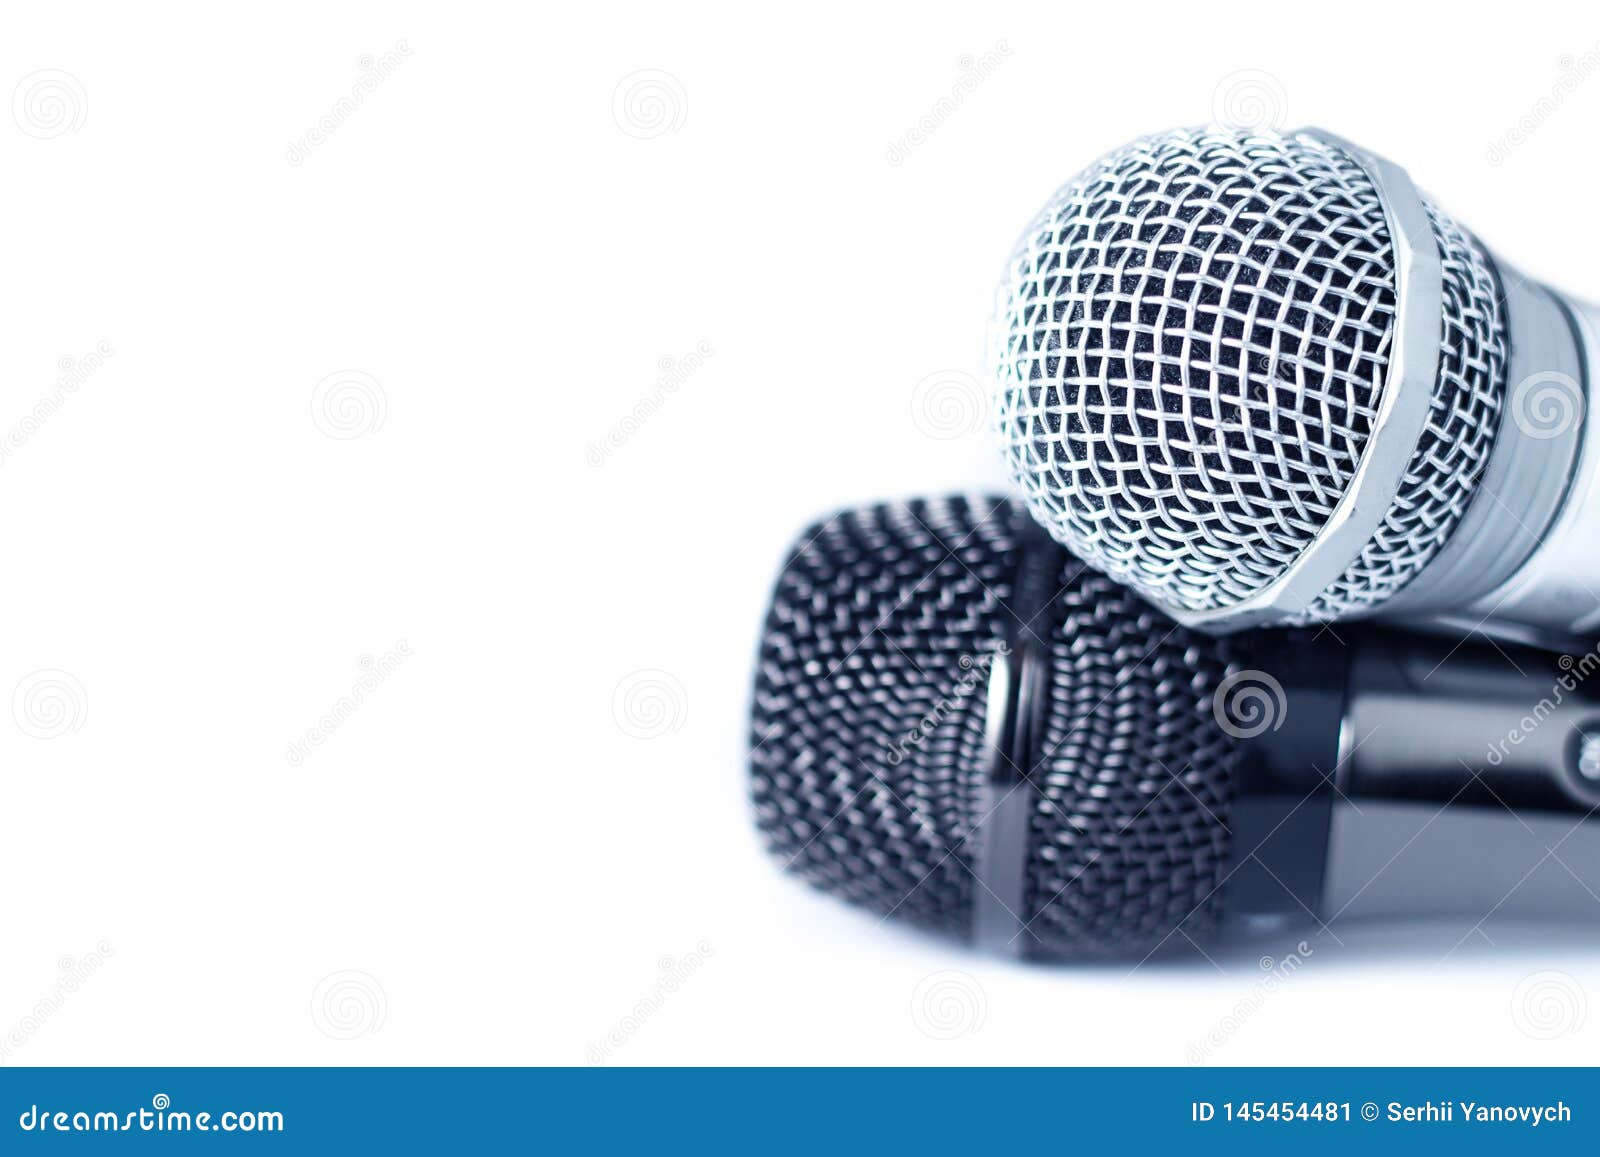 two close-up of microphones on white background with copy space, selective focus